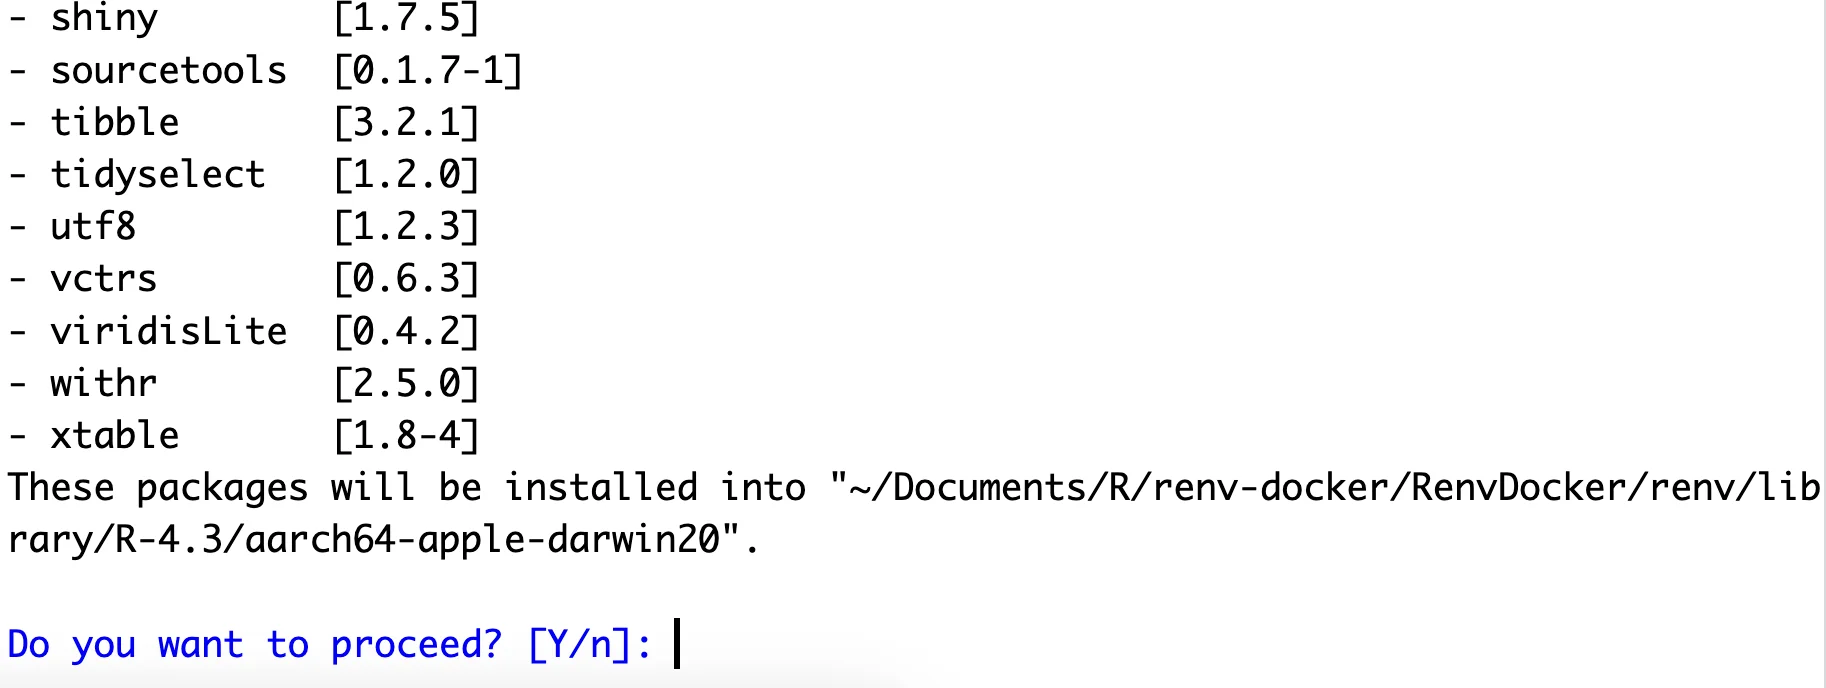 Image 5 - Confirming the installation in a renv folder